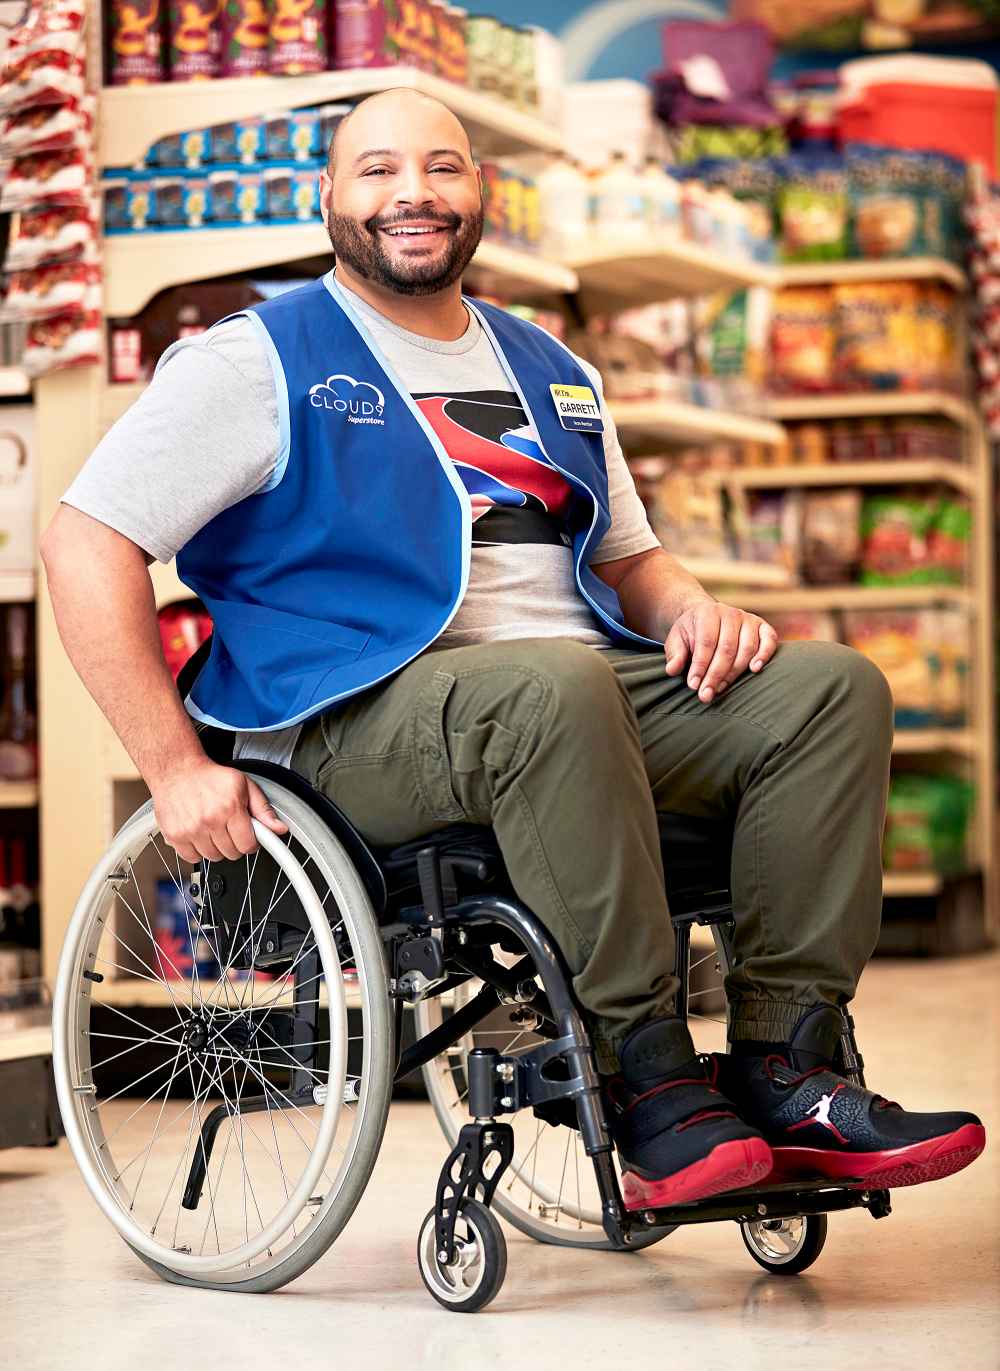 54 Build Presents Colton Dunn Discussing Superstore Stock Photos